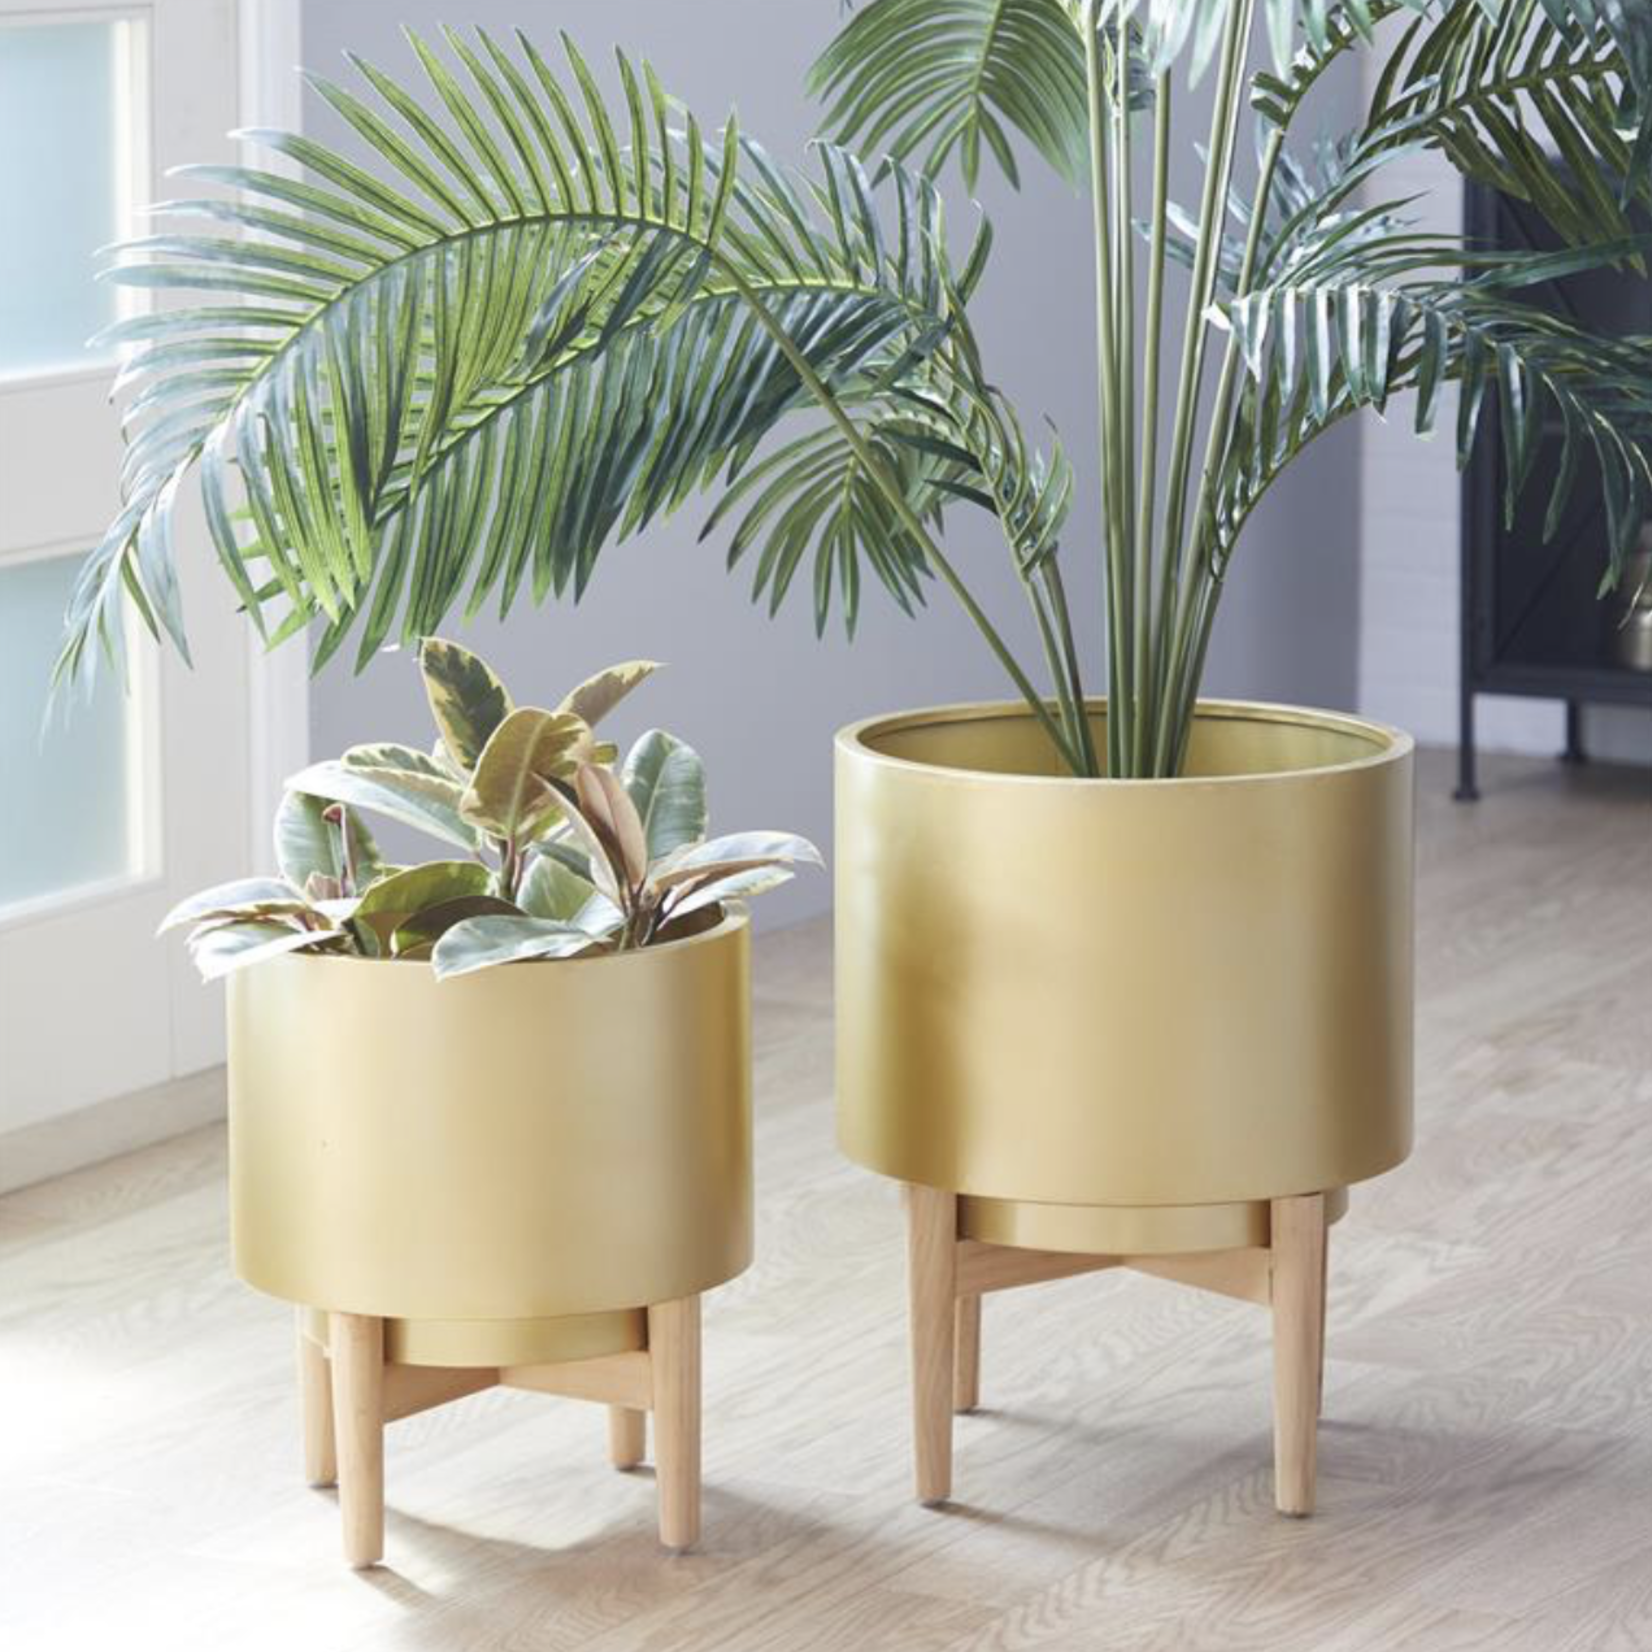 16”H X 14” SMALL GOLD METAL PLANTER WITH WOOD STAND (NOT WATER TIGHT)